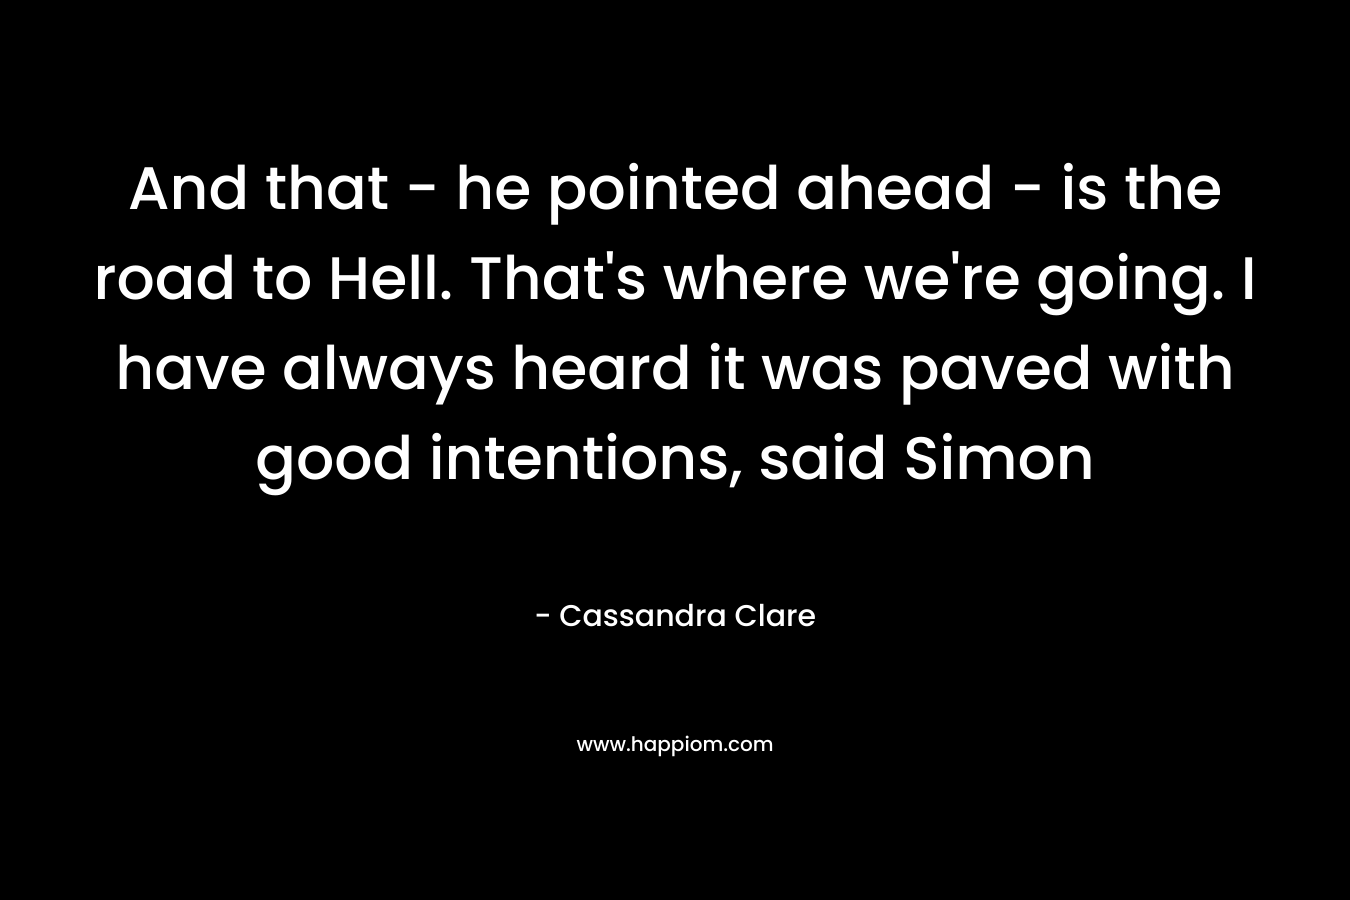 And that - he pointed ahead - is the road to Hell. That's where we're going. I have always heard it was paved with good intentions, said Simon